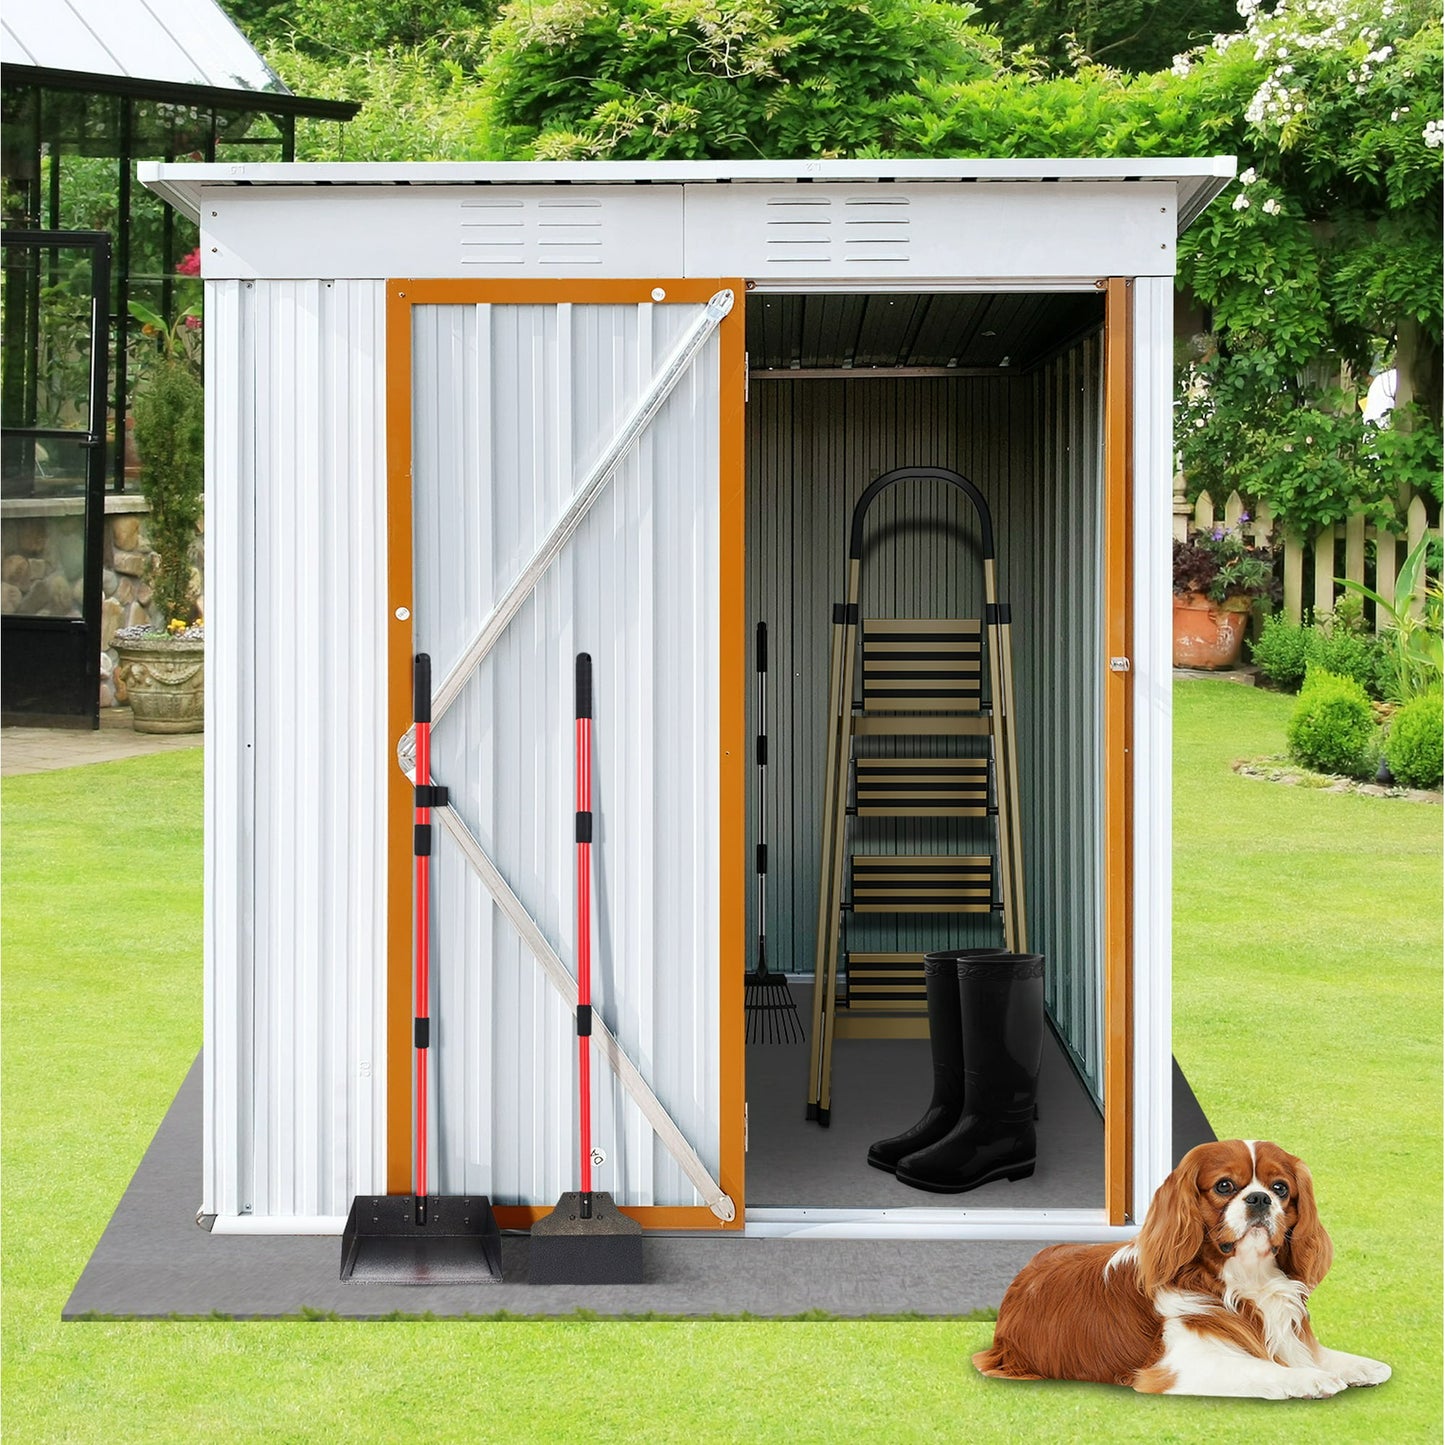 Outdoor Shed Storage Cabinet, 5FT X 3FT Garden Storage Shed Metal with Lockable Doors, Outside Vertical Shed for Patio Lawn Backyard Trash Cans Pet, White,LJ3915